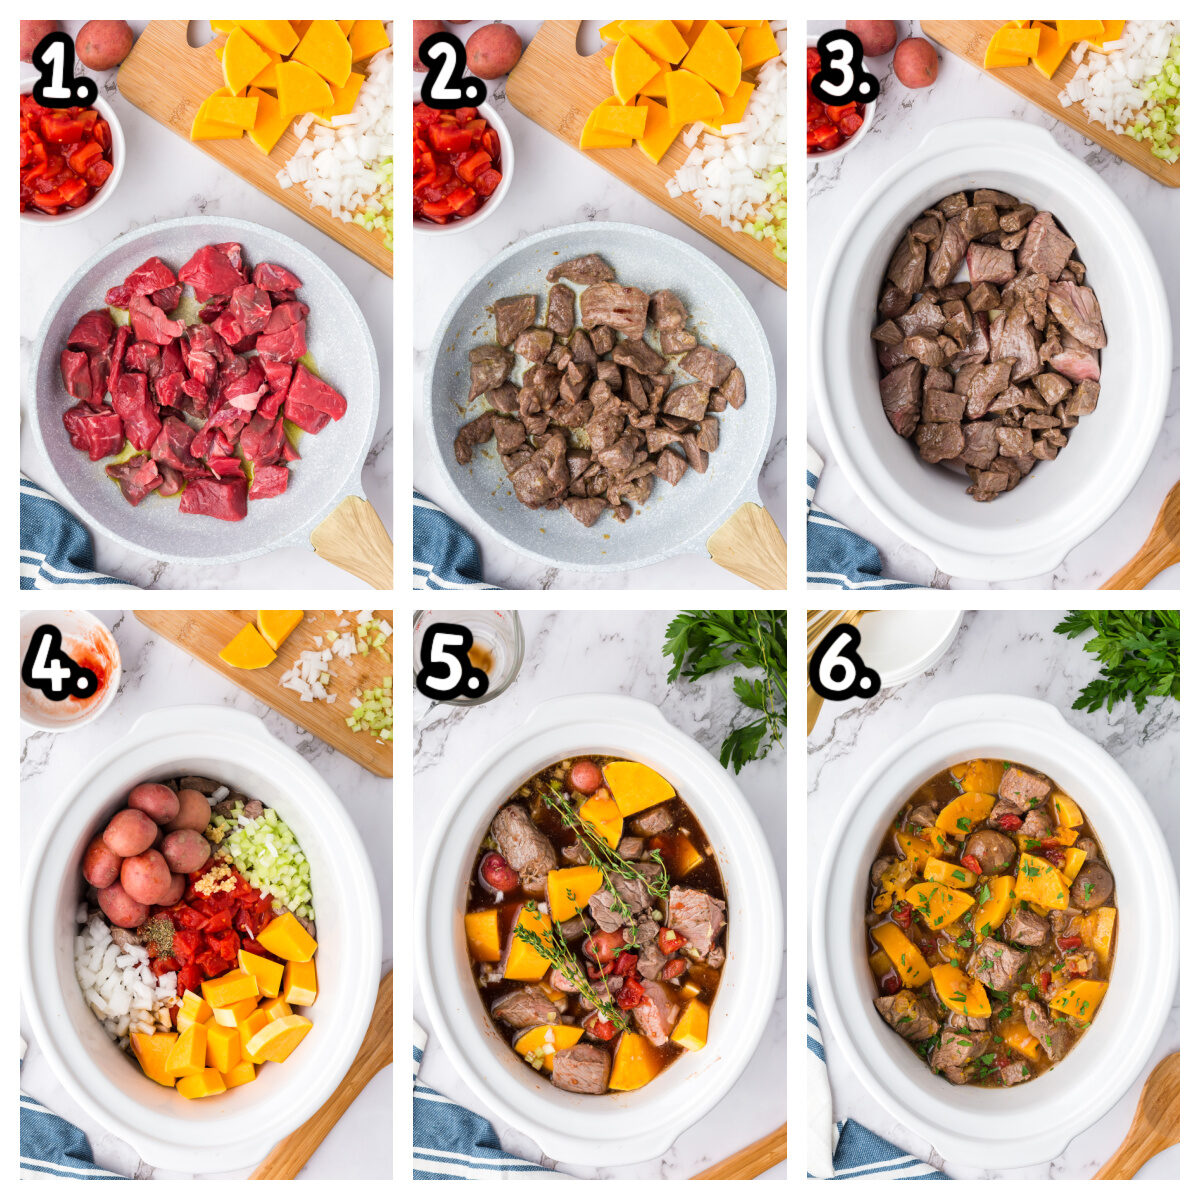 6 images showing how to make beef stew with butter nut squash in slow cooker.